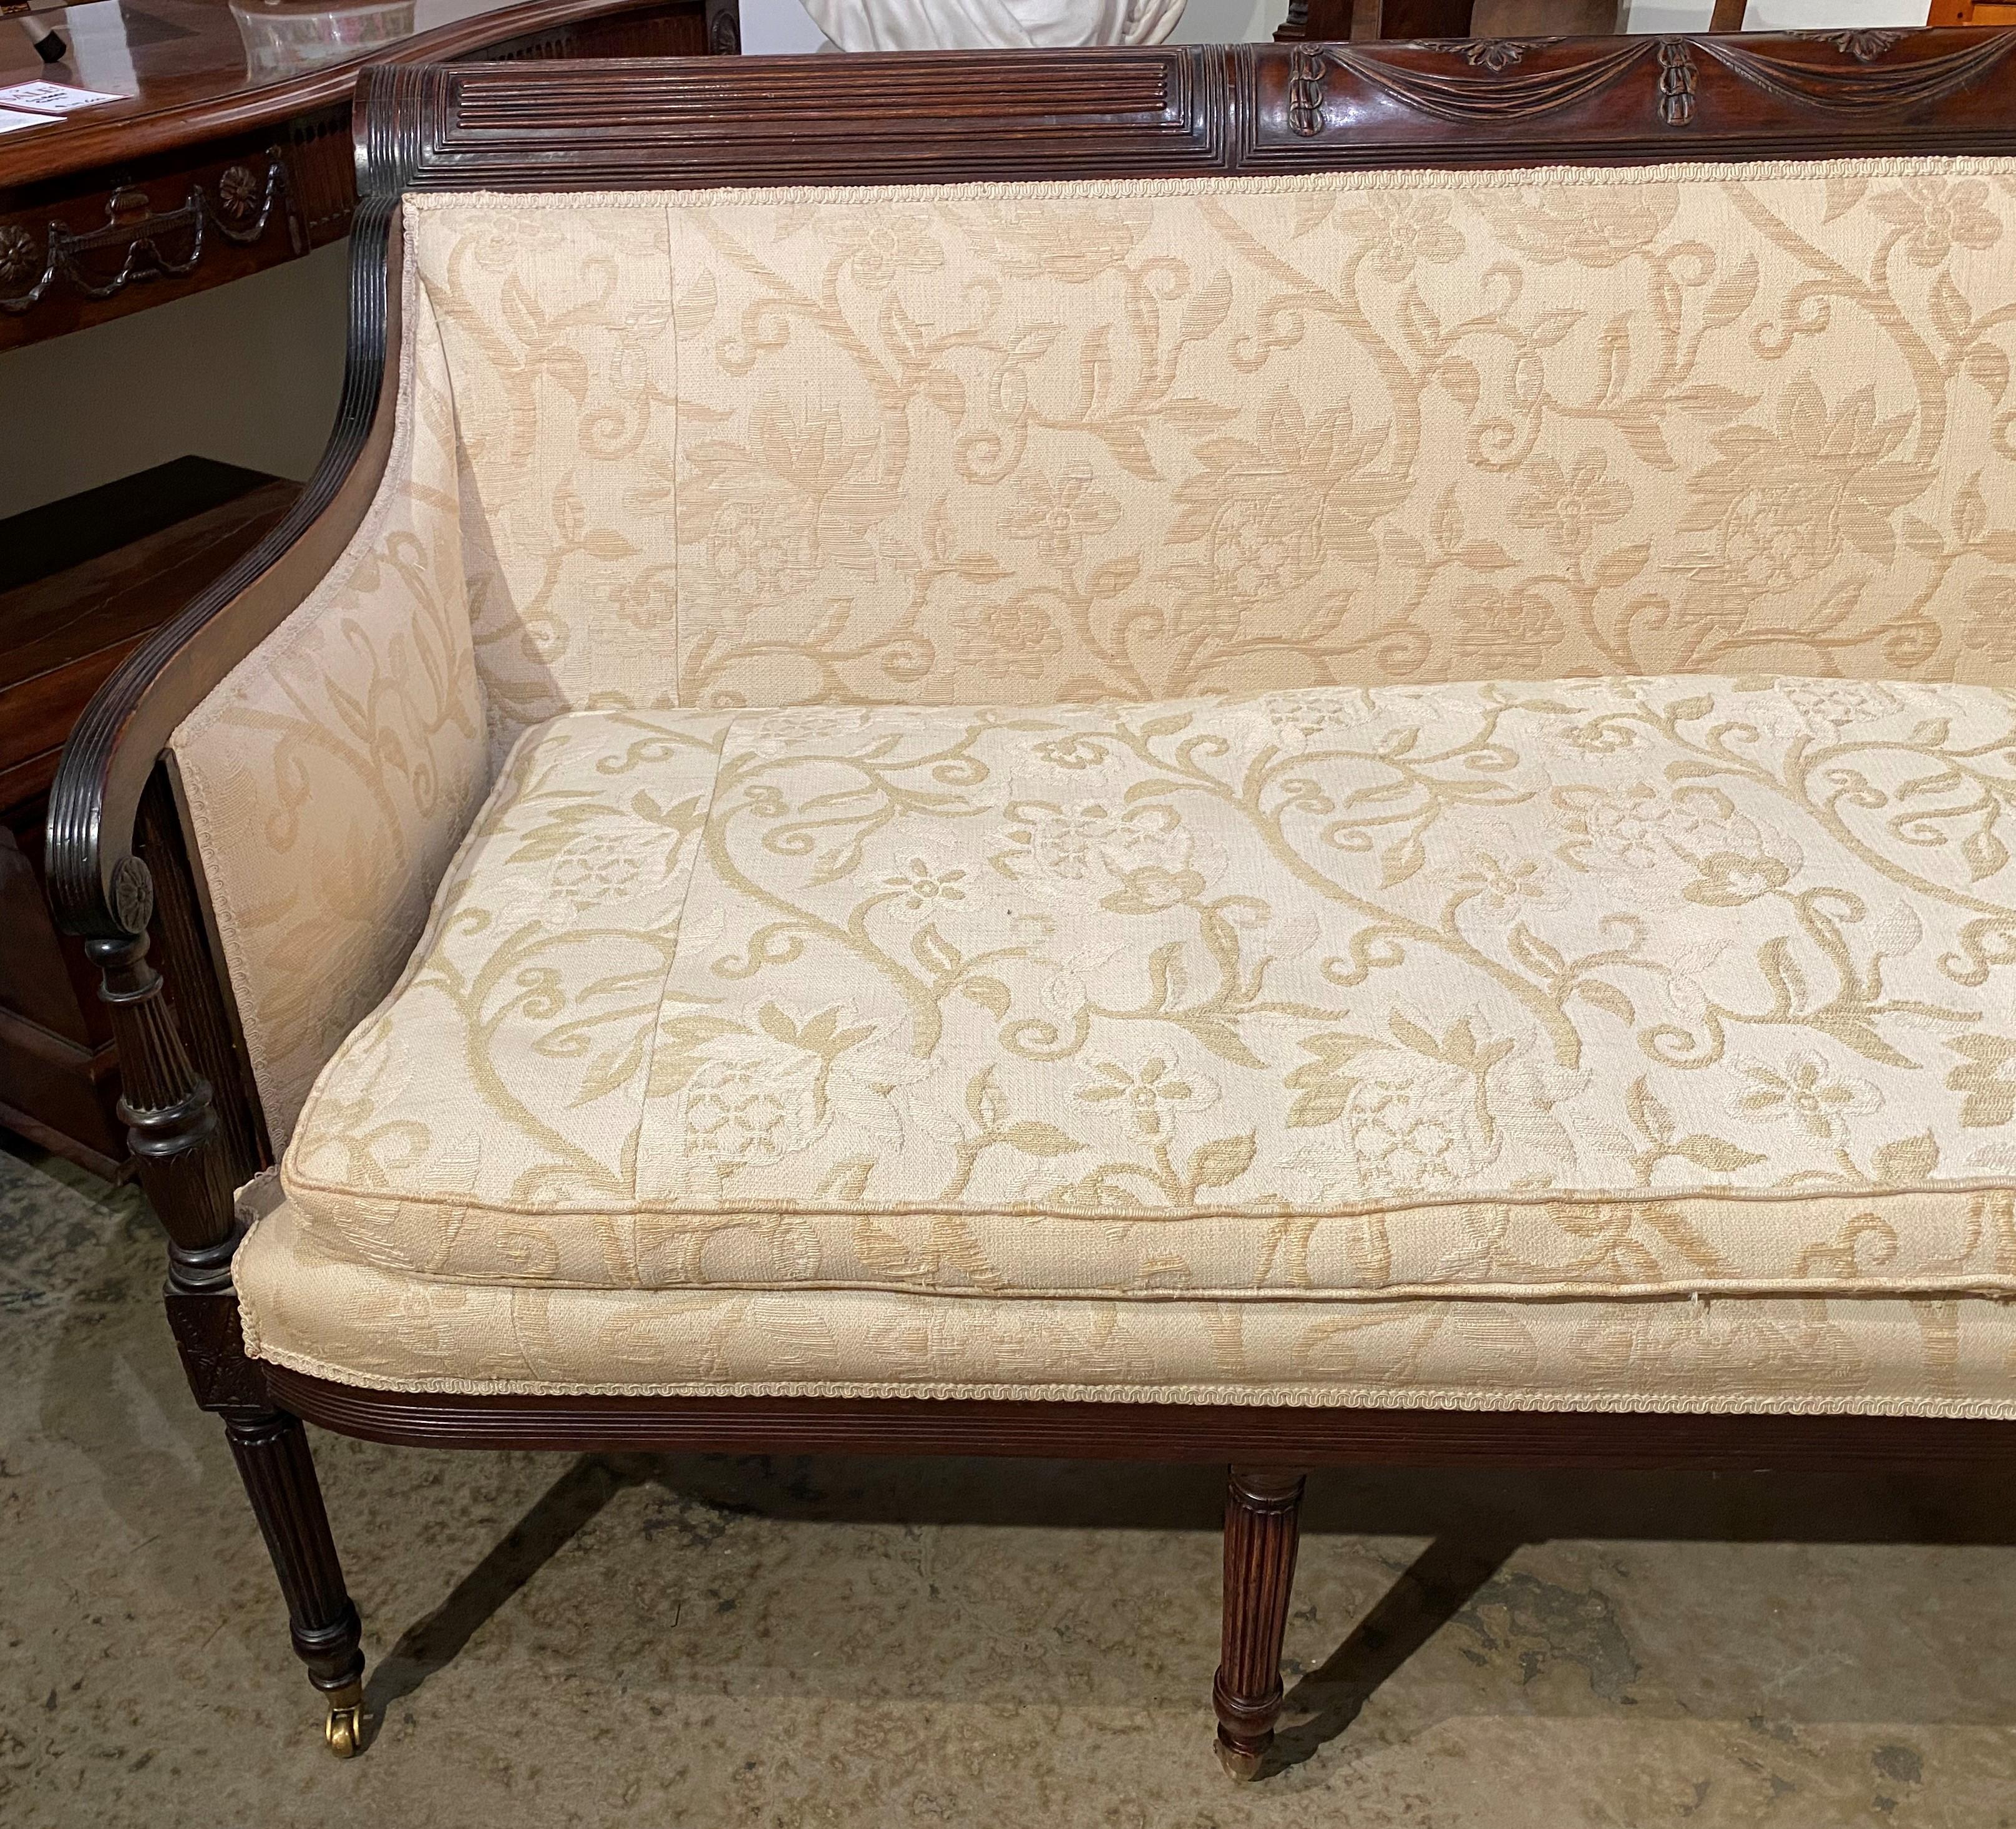 A fine Duncan Phyfe style Federal Mahogany Sofa with decorative swag carved crest, attributed to the Ernest F. Hagen (1830-1913) Workshop, with fine form scroll carved arms, foliate cream colored upholstery with removable cushion, all supported by